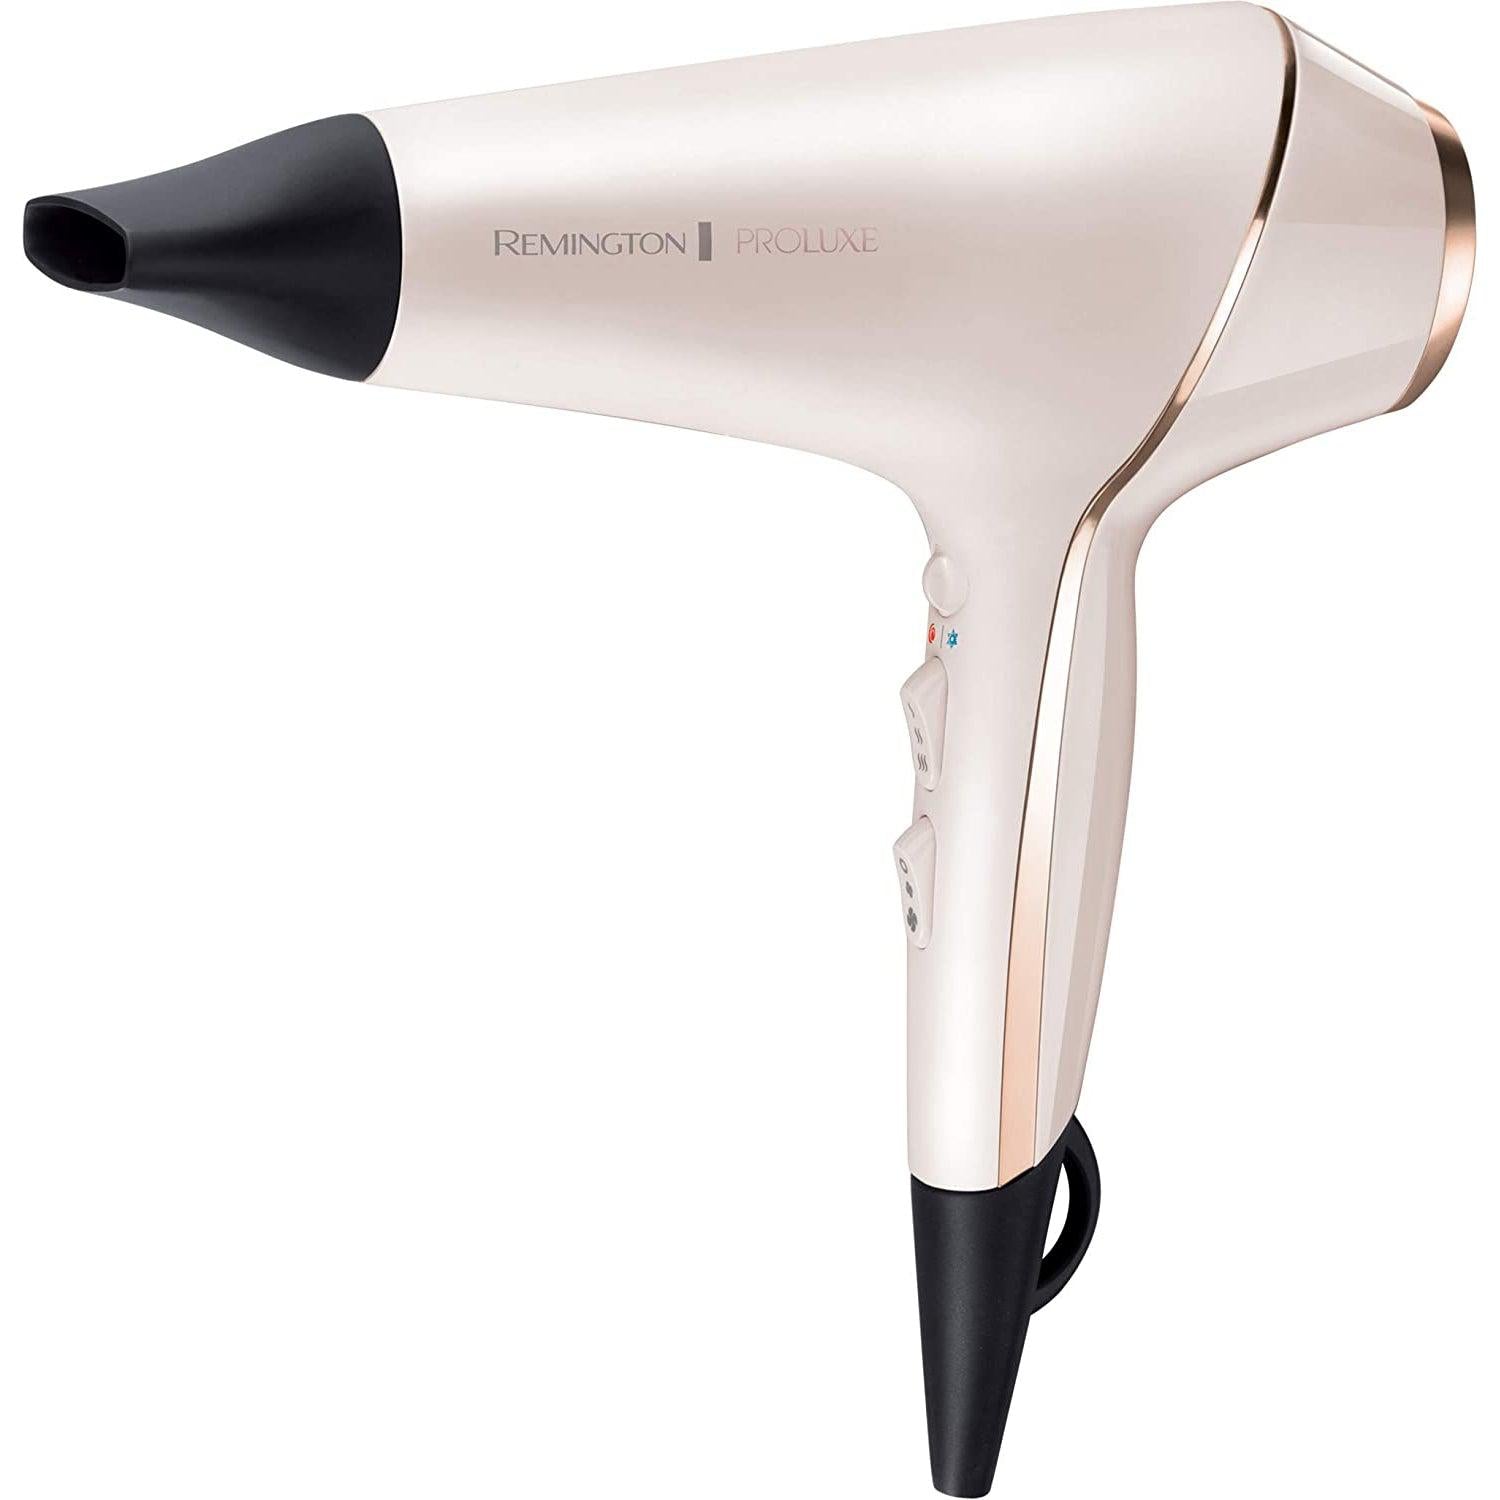 Remington Proluxe Ionic Hairdryer 2400 W, Rose Gold - AC9140 - Healthxpress.ie